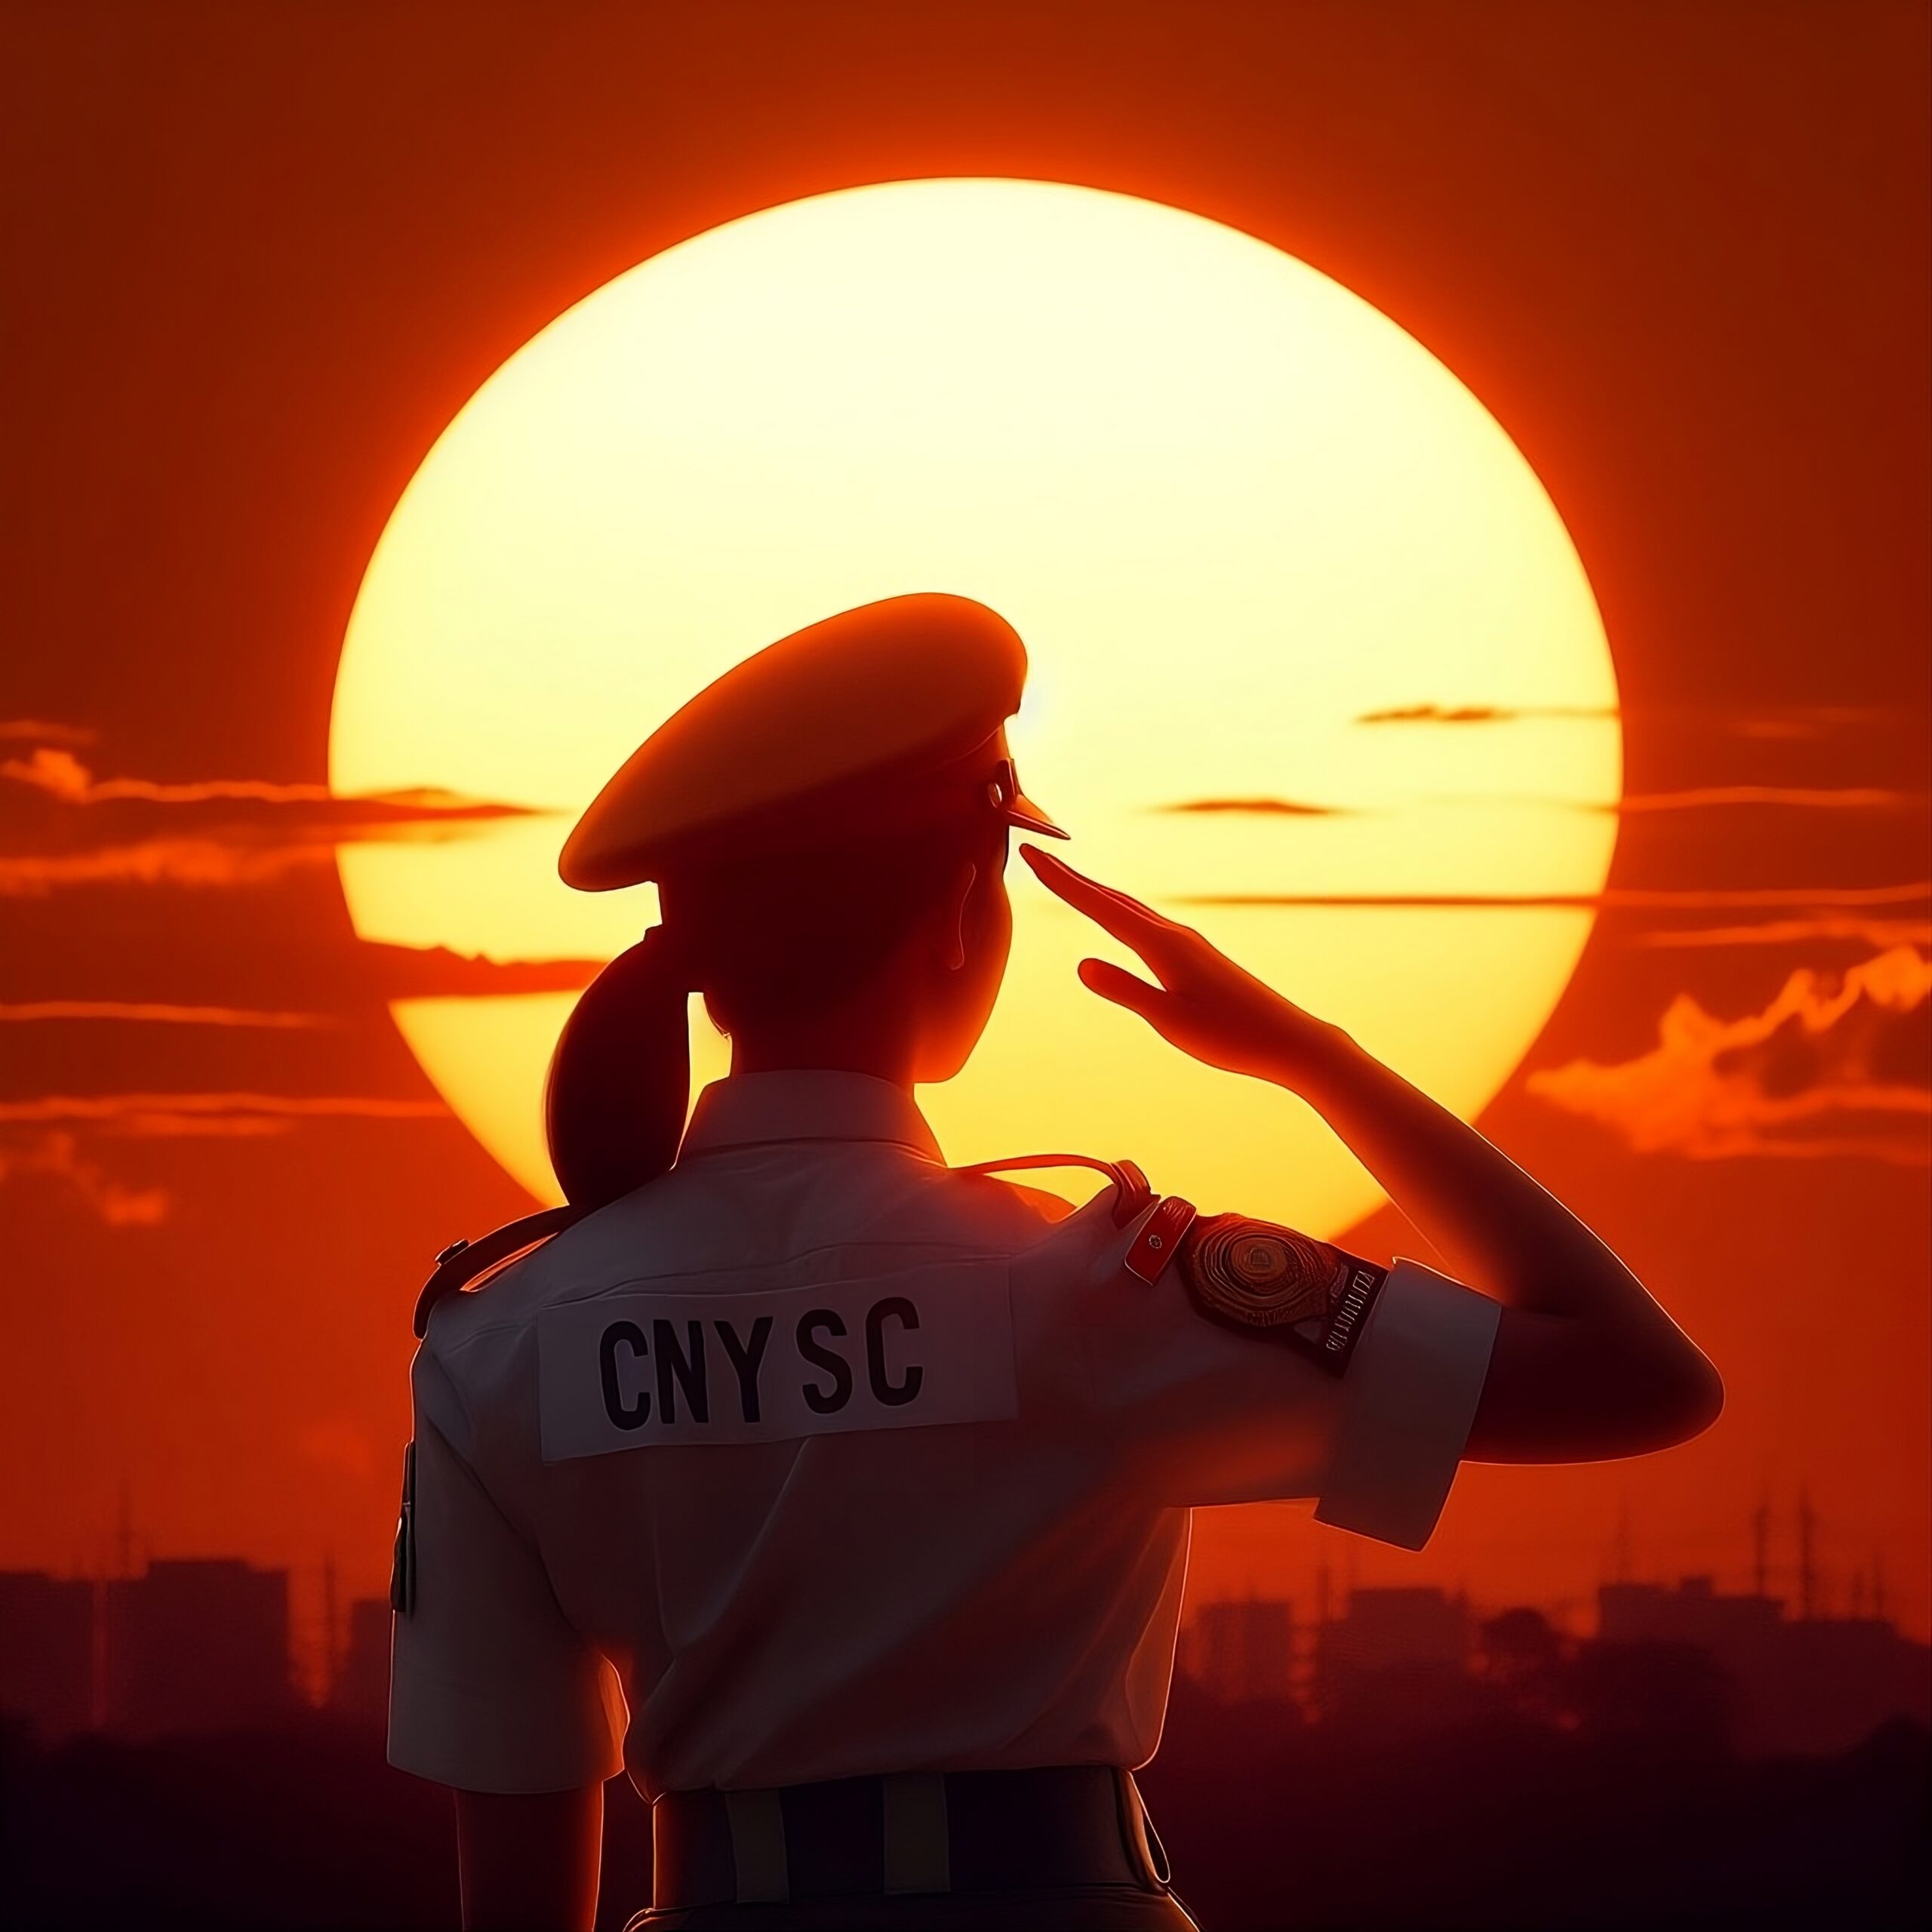 notice: we want strangers. picture of an nysc corper making a salute in full glare of the sun